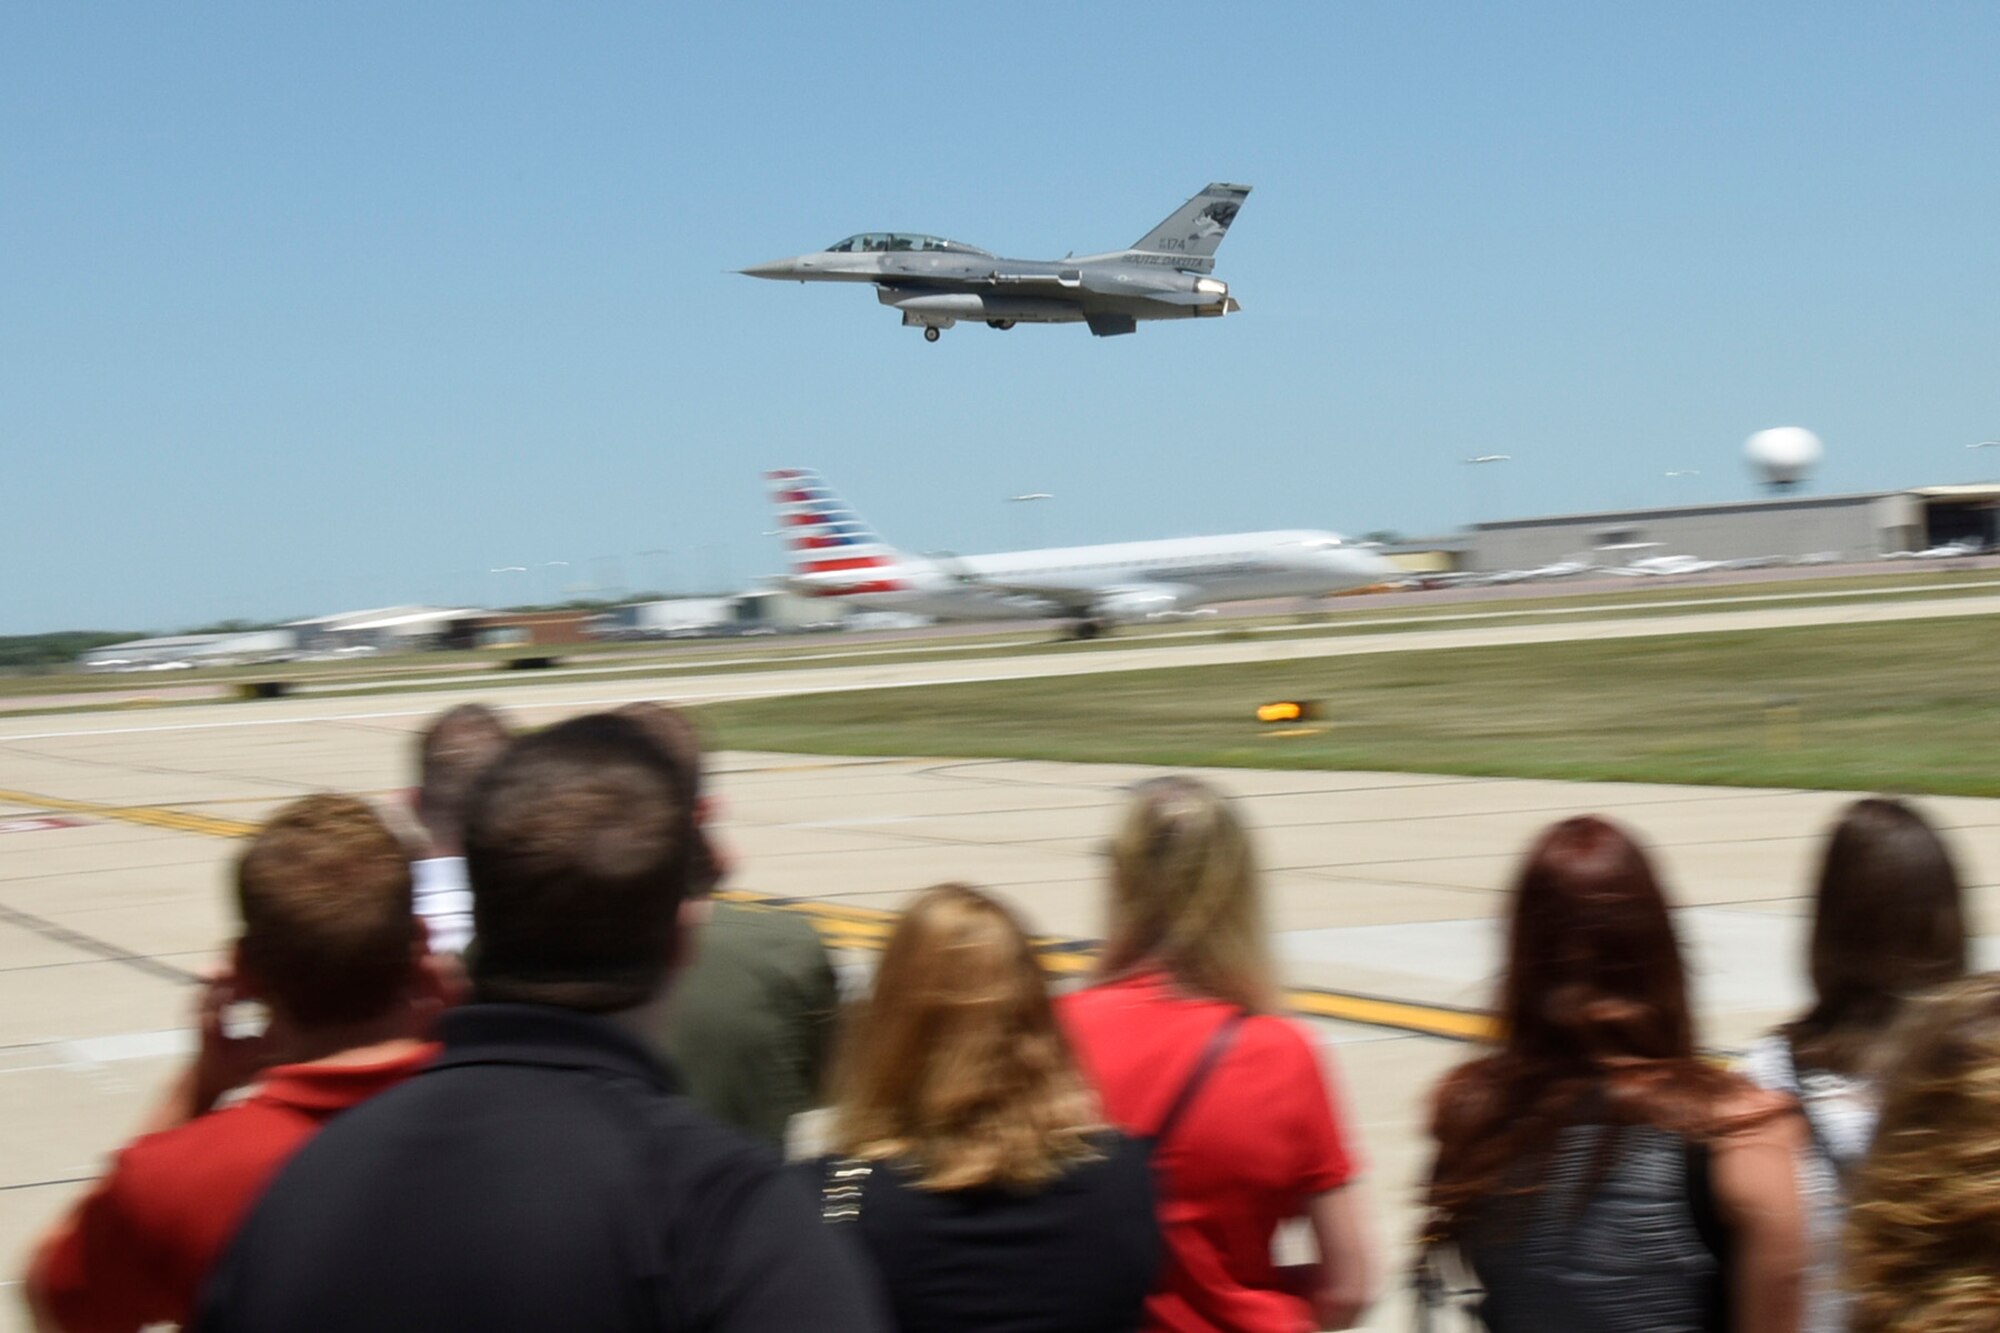 SIOUX FALLS, S.D. -  Members of the Sioux Falls Area Chamber of Commerce Young Professionals Network got an up close view of an F-16 launch from Joe Foss Field, S.D. during a tour and briefing given by members of the  South Dakota Air National Guard on July 13, 2016.(U.S. Air National Guard photo by Senior Master Sgt. Nancy Ausland/Released)